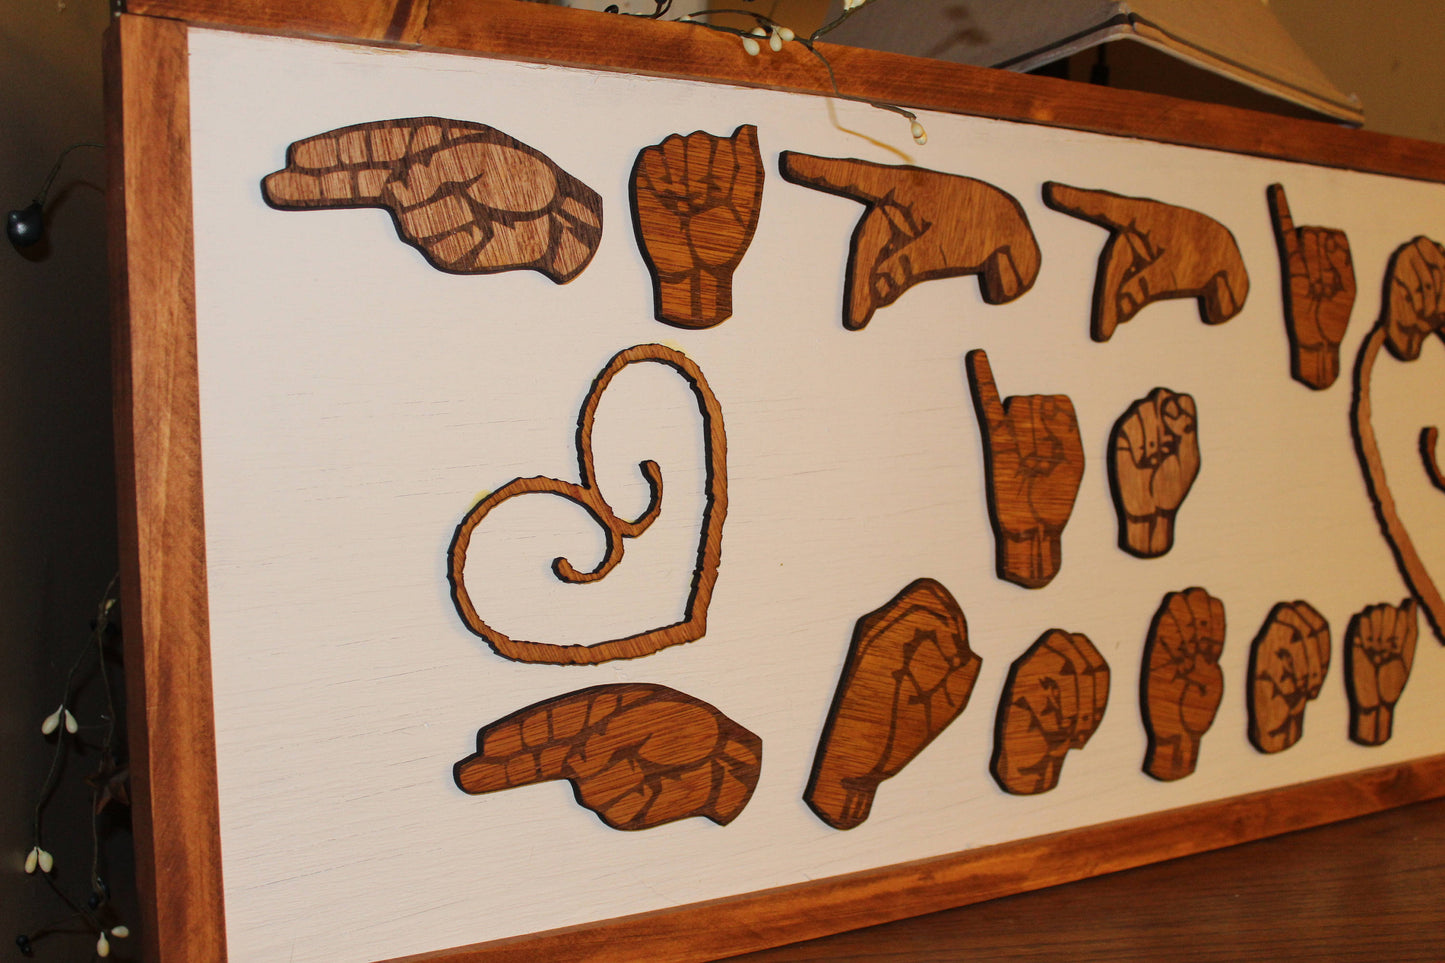 American Sign Language, ASL, Happiness is Homemade, Sign for the Deaf, Wood, Hands, 3D Hands, Frame, wood cut outs Footstepsinthepast